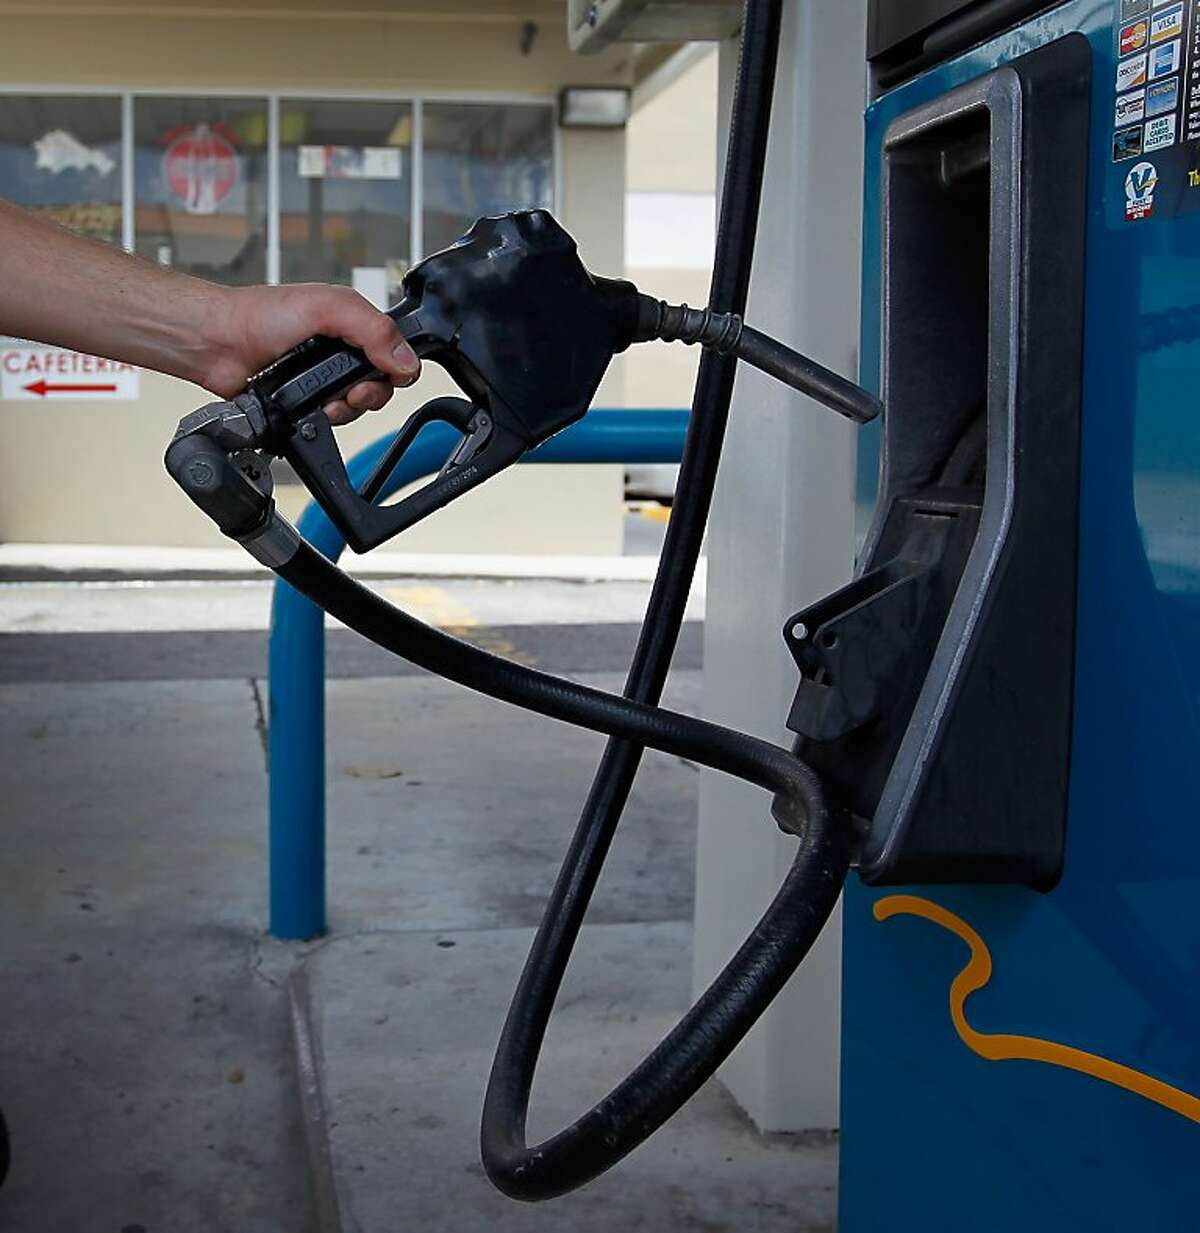 MIAMI, FL - MAY 11: Raciel Henry replaces the gas pump handle after filling up his motorbike with fuel at a Valero station on May 11, 2012 in Miami, Florida. Reports indicate that gasoline prices have dropped 5 percent since peaking last month. The national average fell to $3.739 per gallon on Thursday, down nearly 20 cents since hitting a high of $3.936 on April 6. (Photo by Joe Raedle/Getty Images)